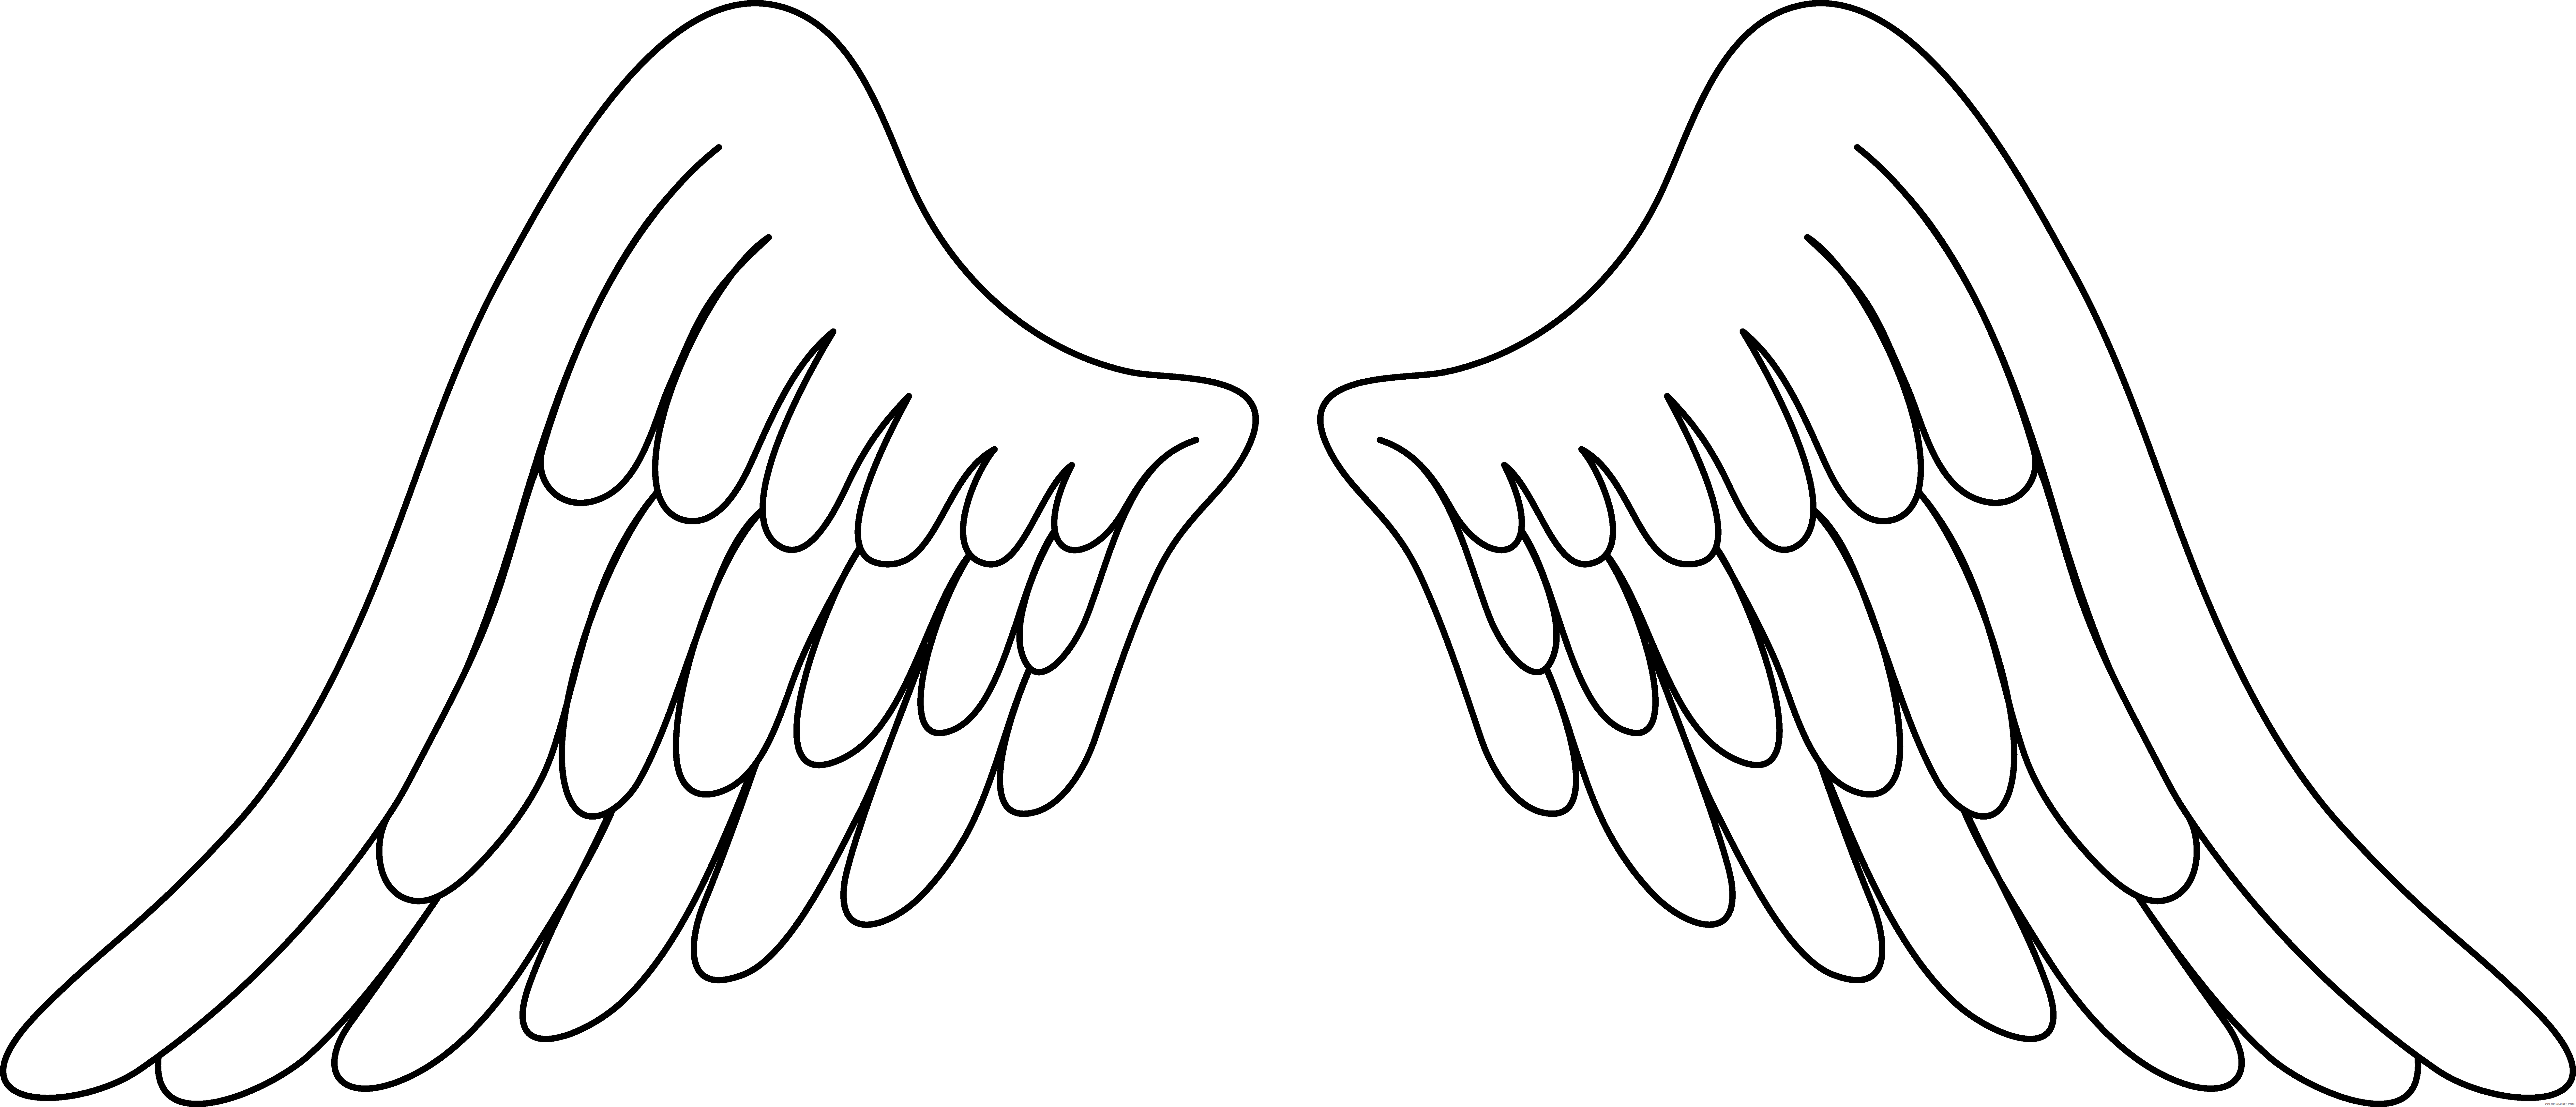 Angel Wing Coloring Page Printable Sheets 13 Pics of Angels With 2021 a 6075 Coloring4free